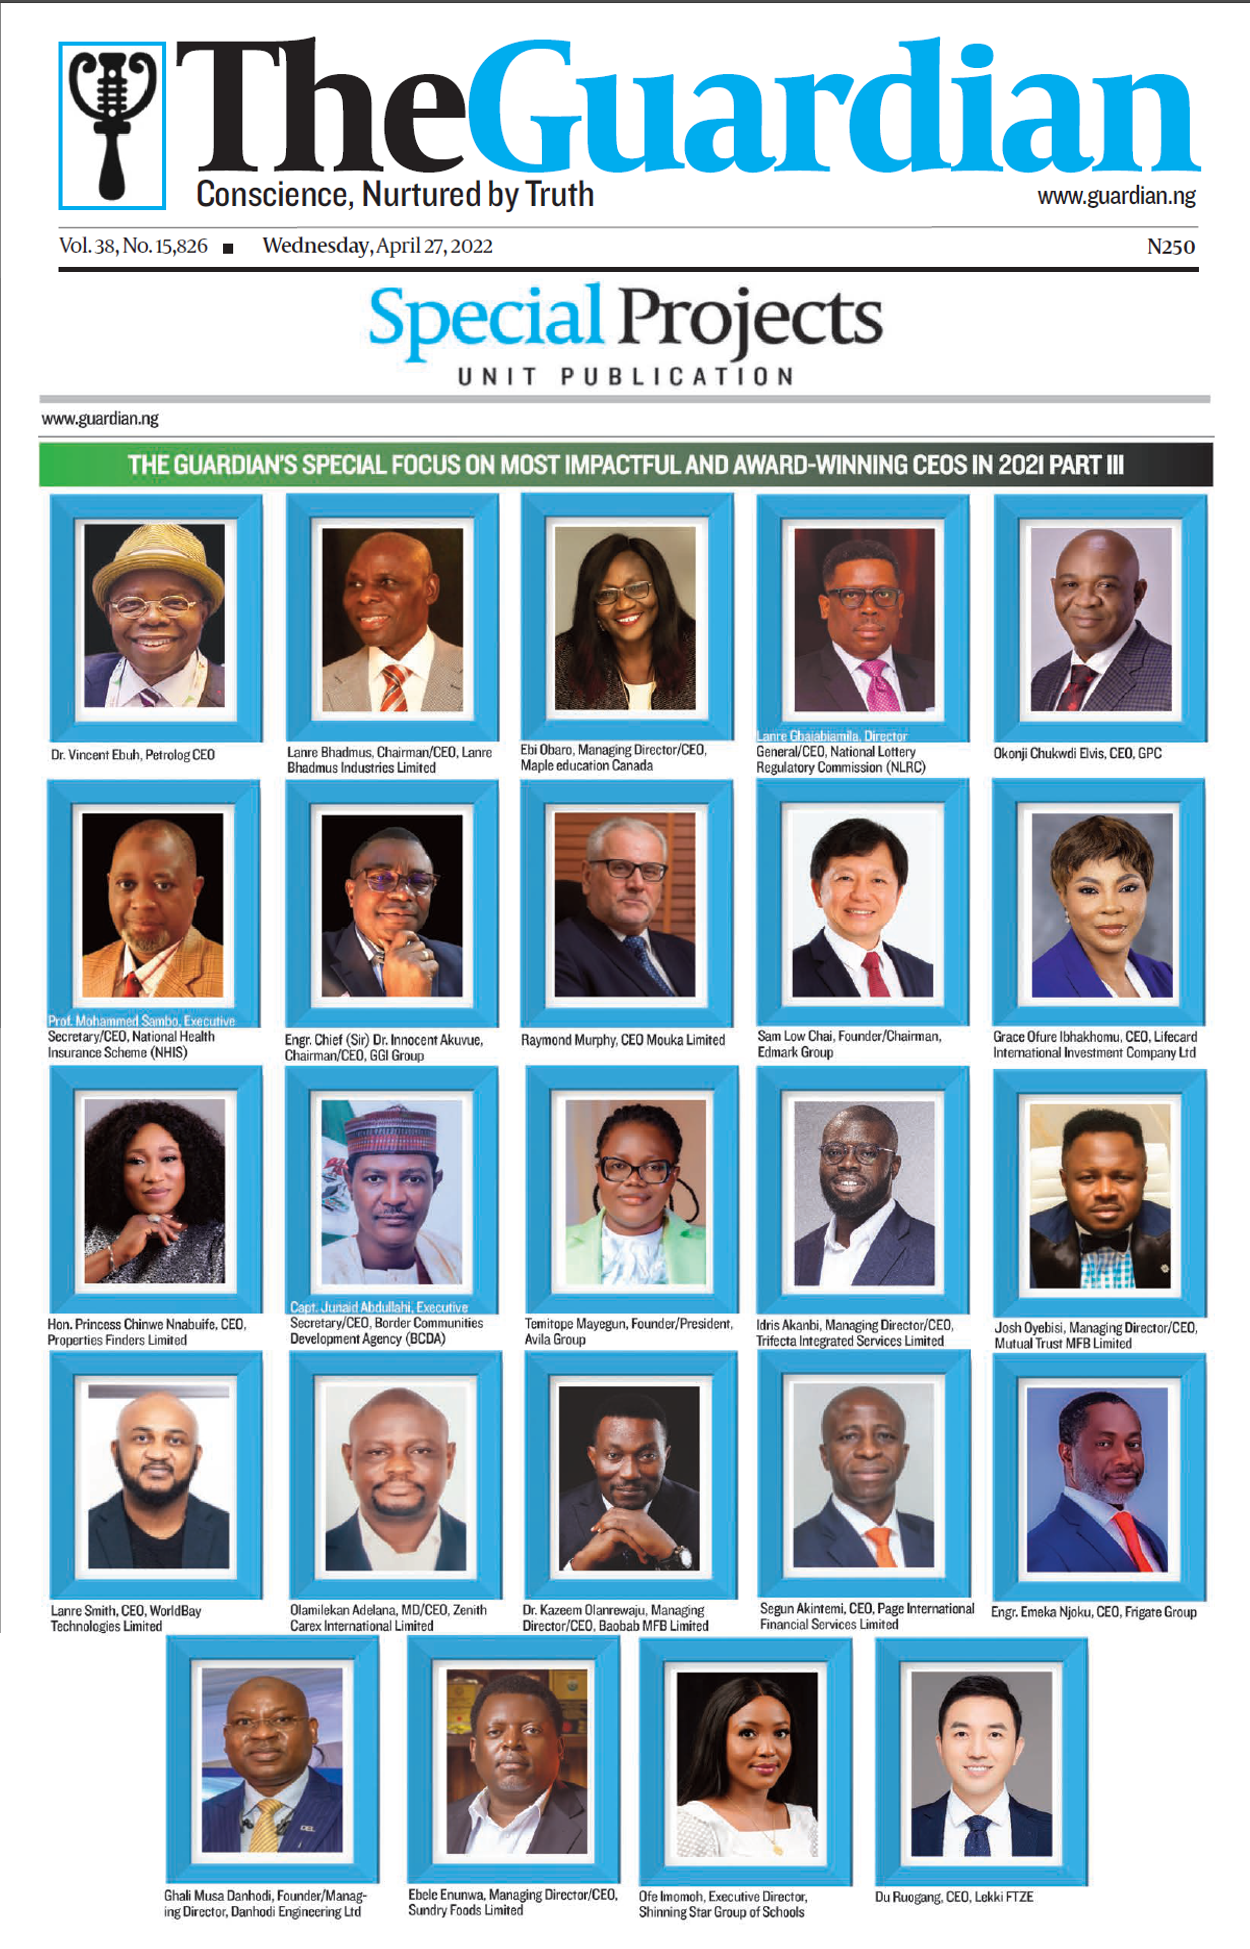 The Guardian Newspaper – 50 Most Impactful and Award Winning CEOs that Contributed to Nigeria’s GDP Growth in 2021